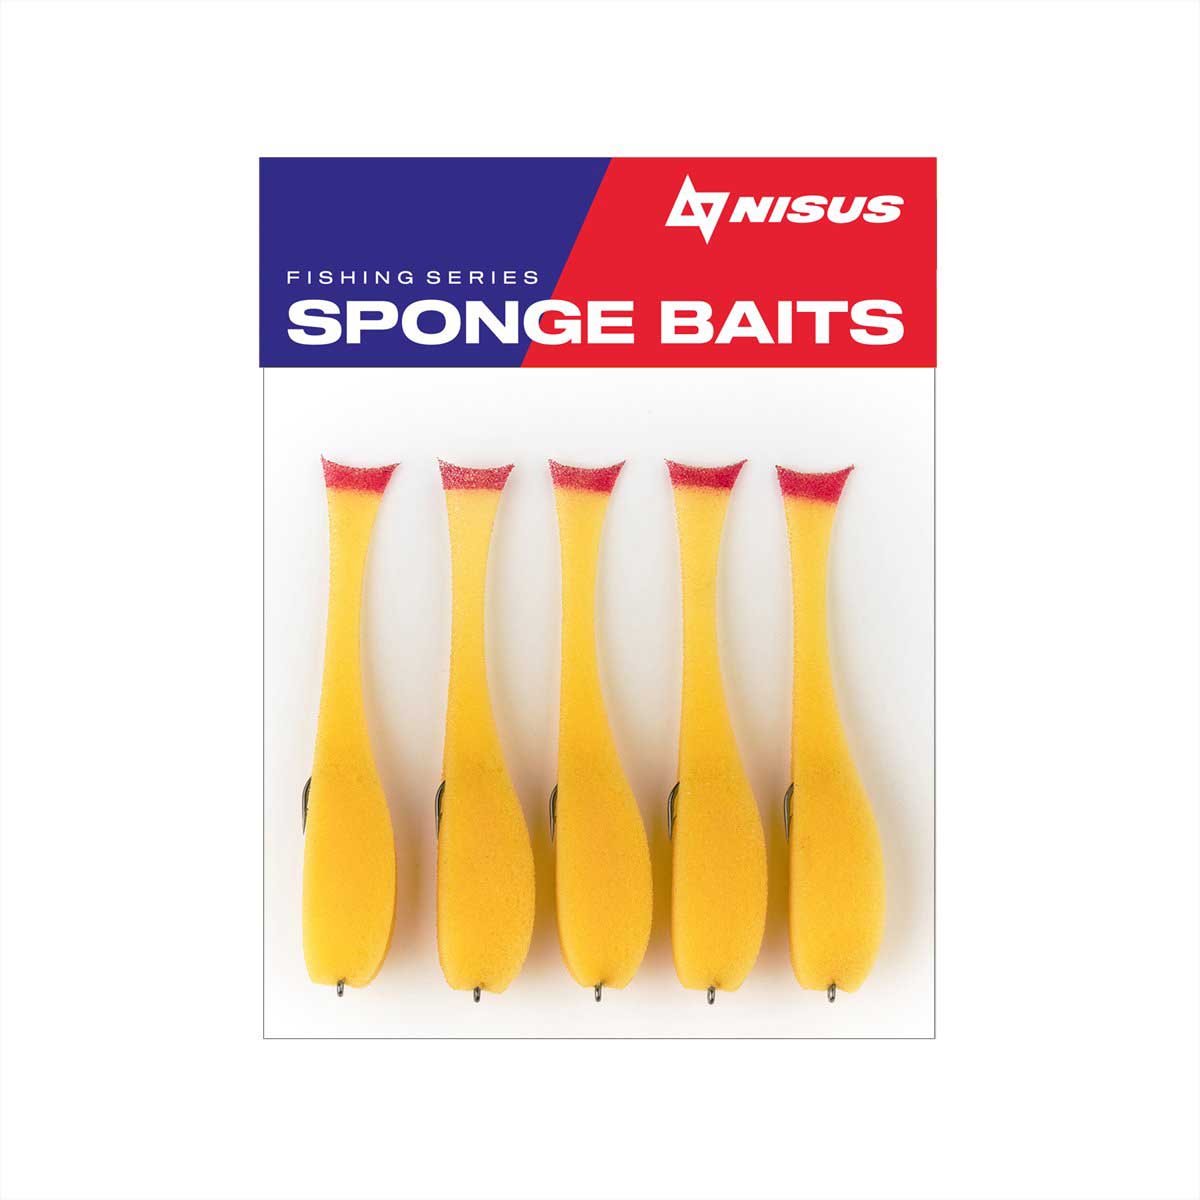 5" Sponge Bait with an Offset Hook for Predatory Fish, Multi-Colored, 5 pcs